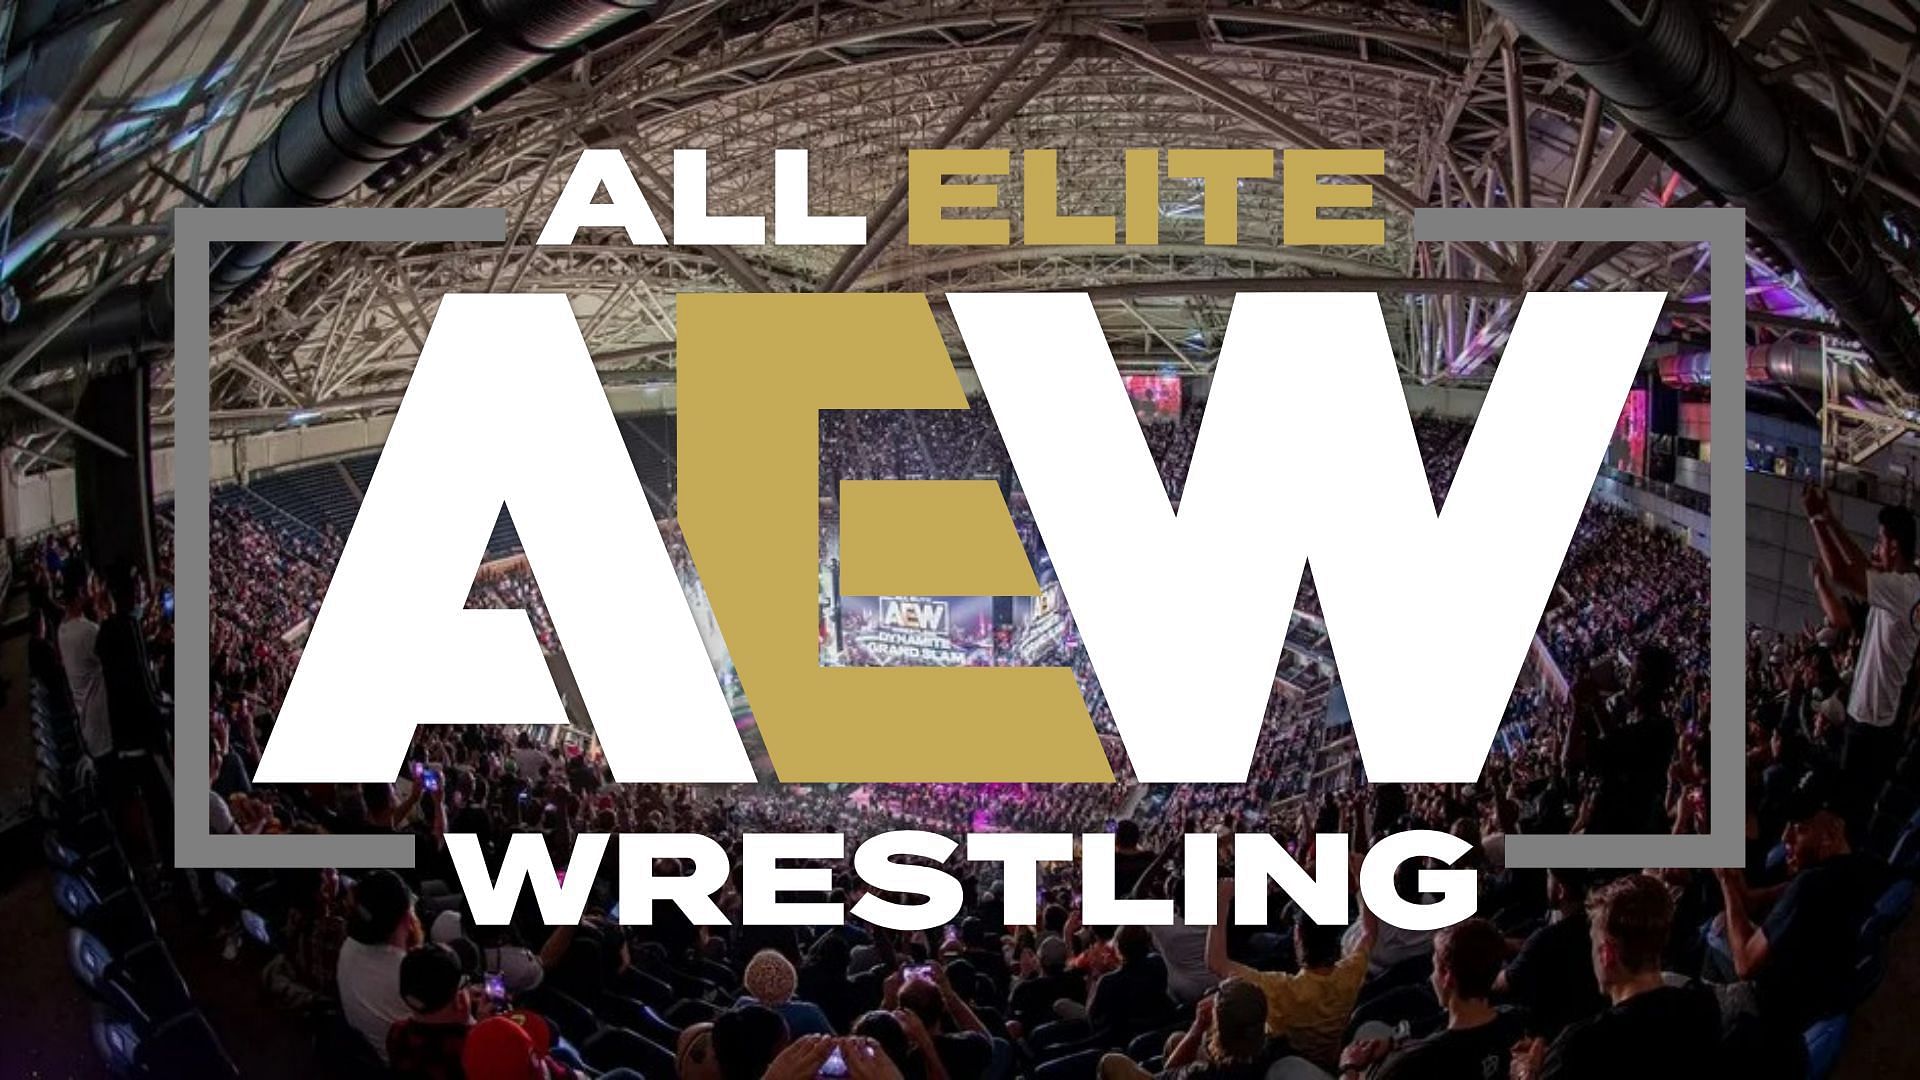 Why has an AEW not been wrestling as much this year?